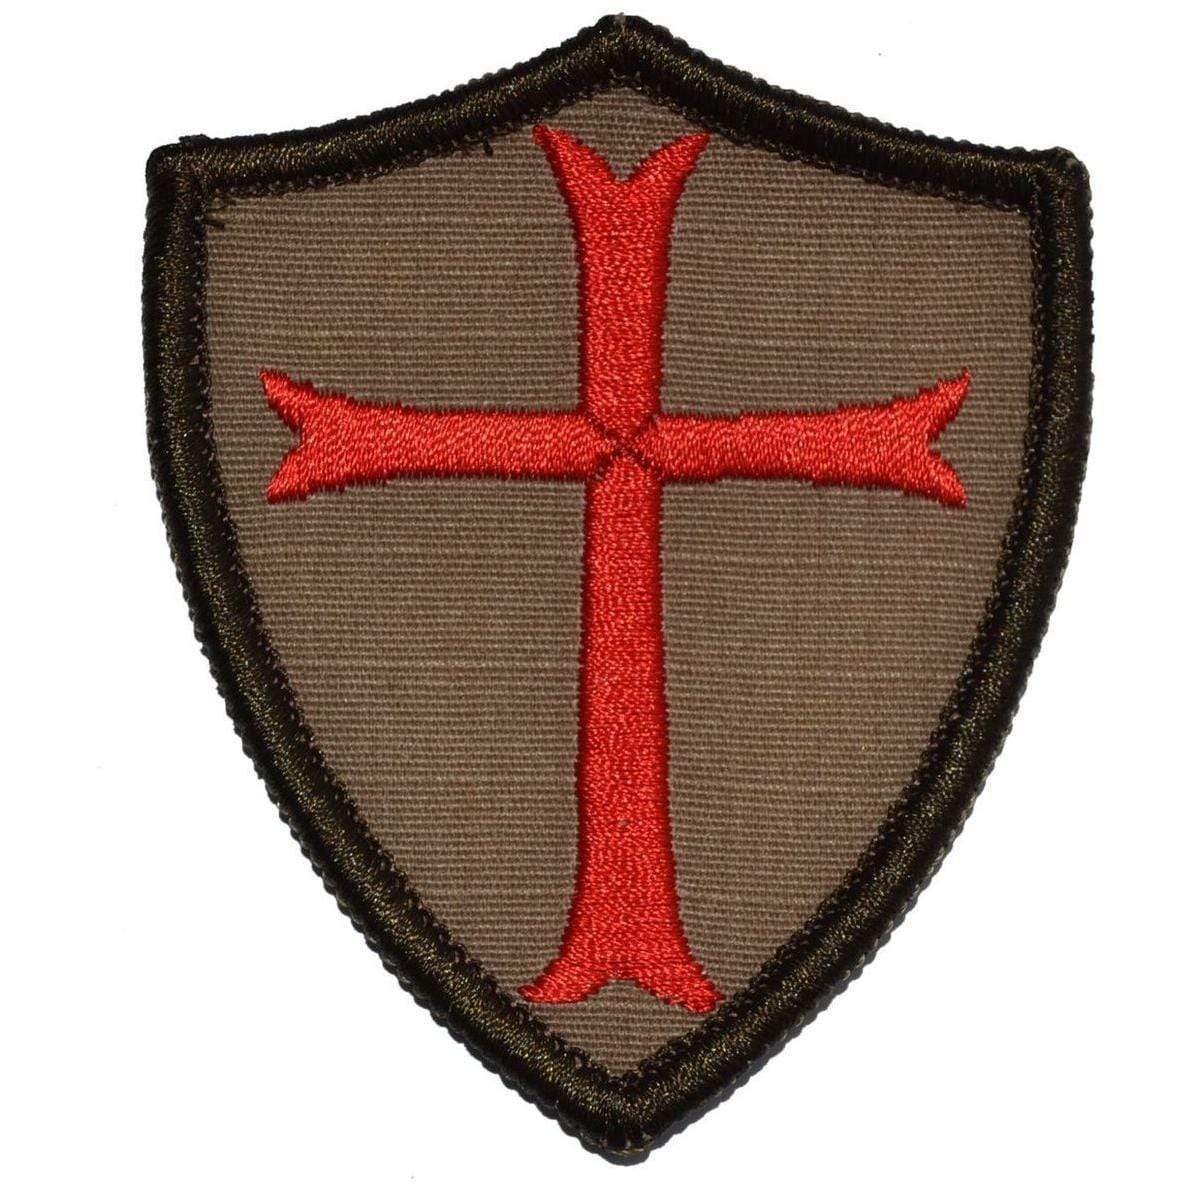 Tactical Gear Junkie Patches Coyote Brown Knights Templar - 2.5x3 Shield Patch